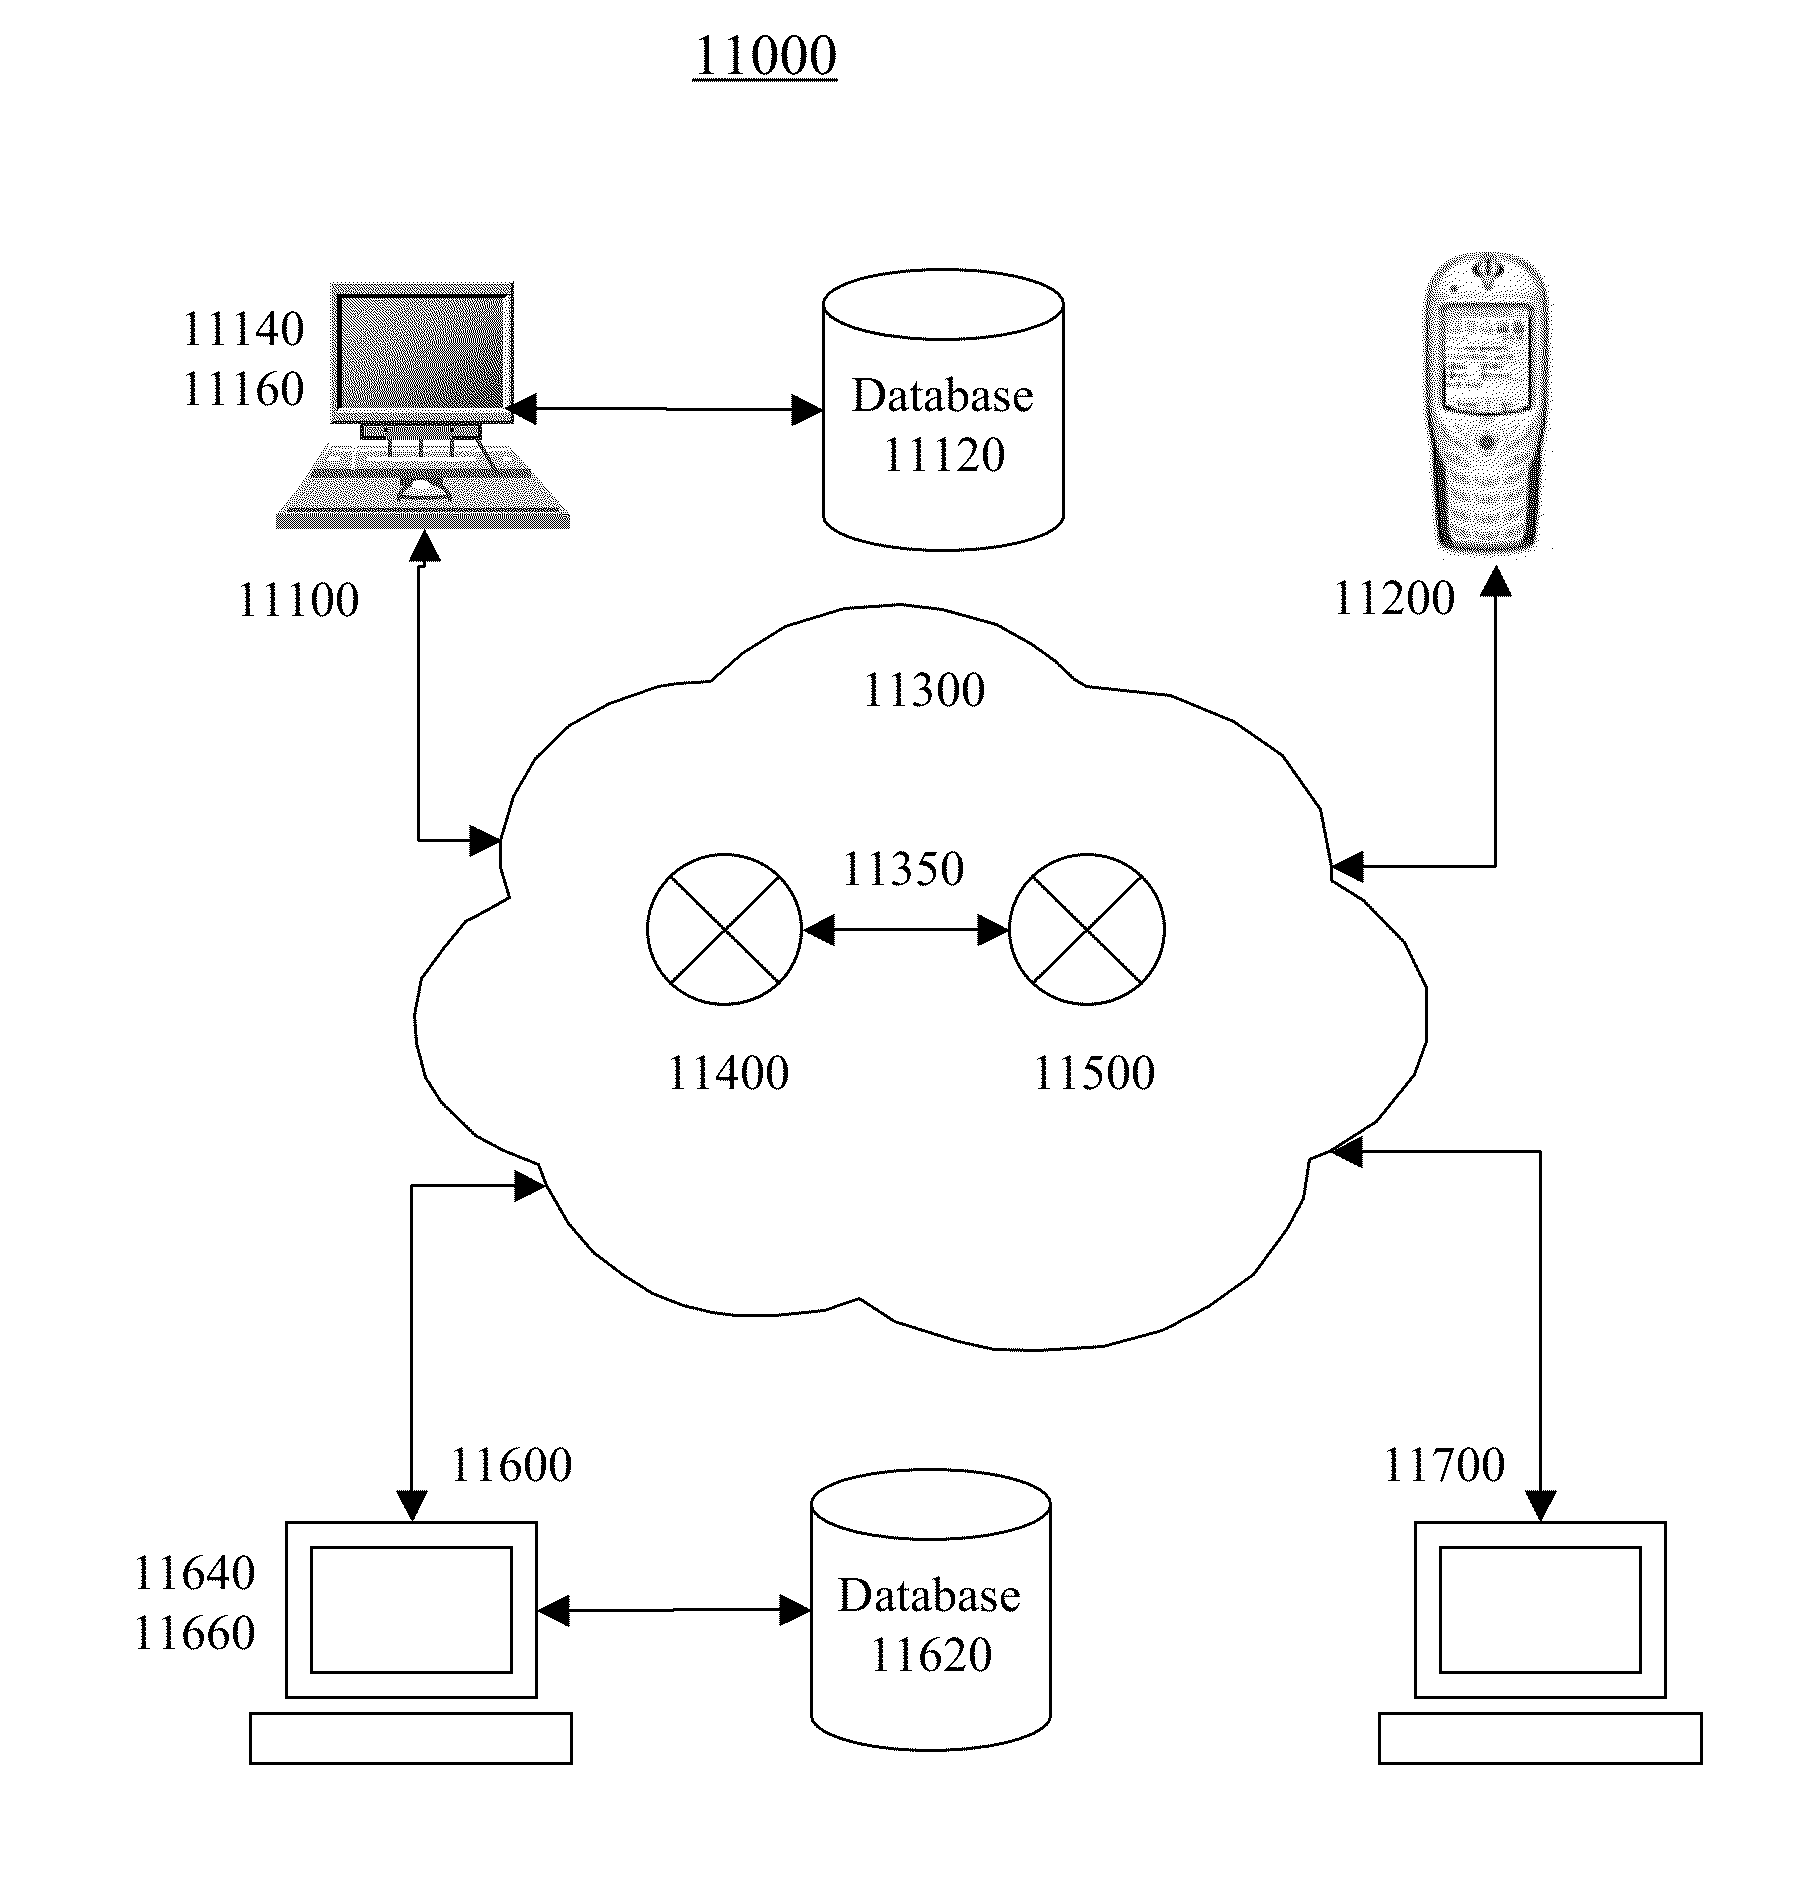 Systems, devices, and/or methods for managing sample selection bias